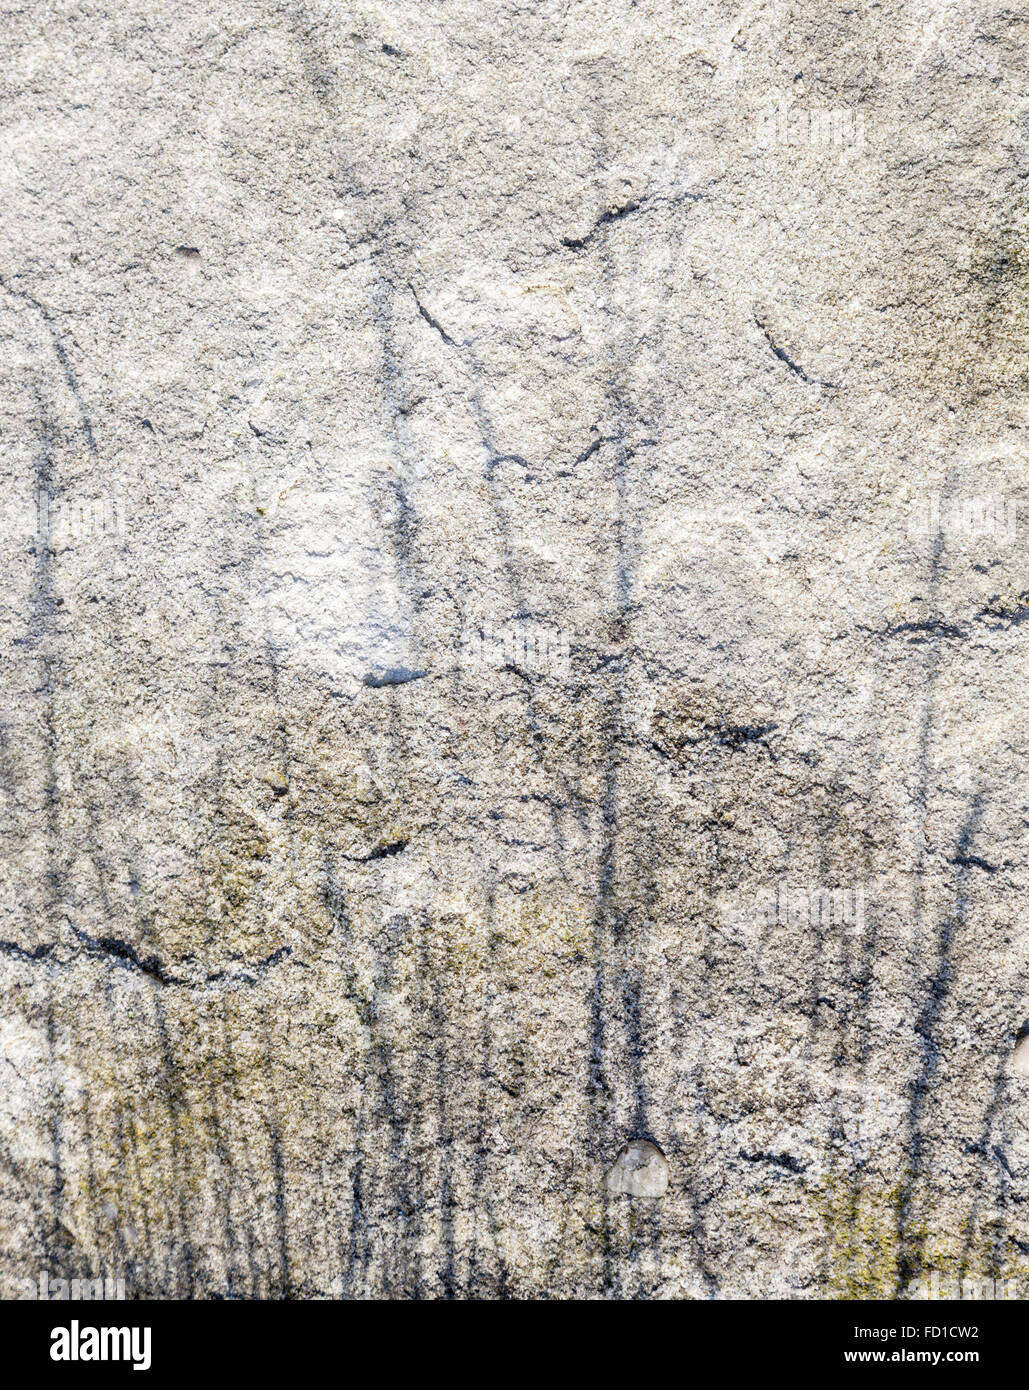 Shadow of long grass on stone. Rock texture background with shadows. Gritstone textures from the UK. Stock Photo